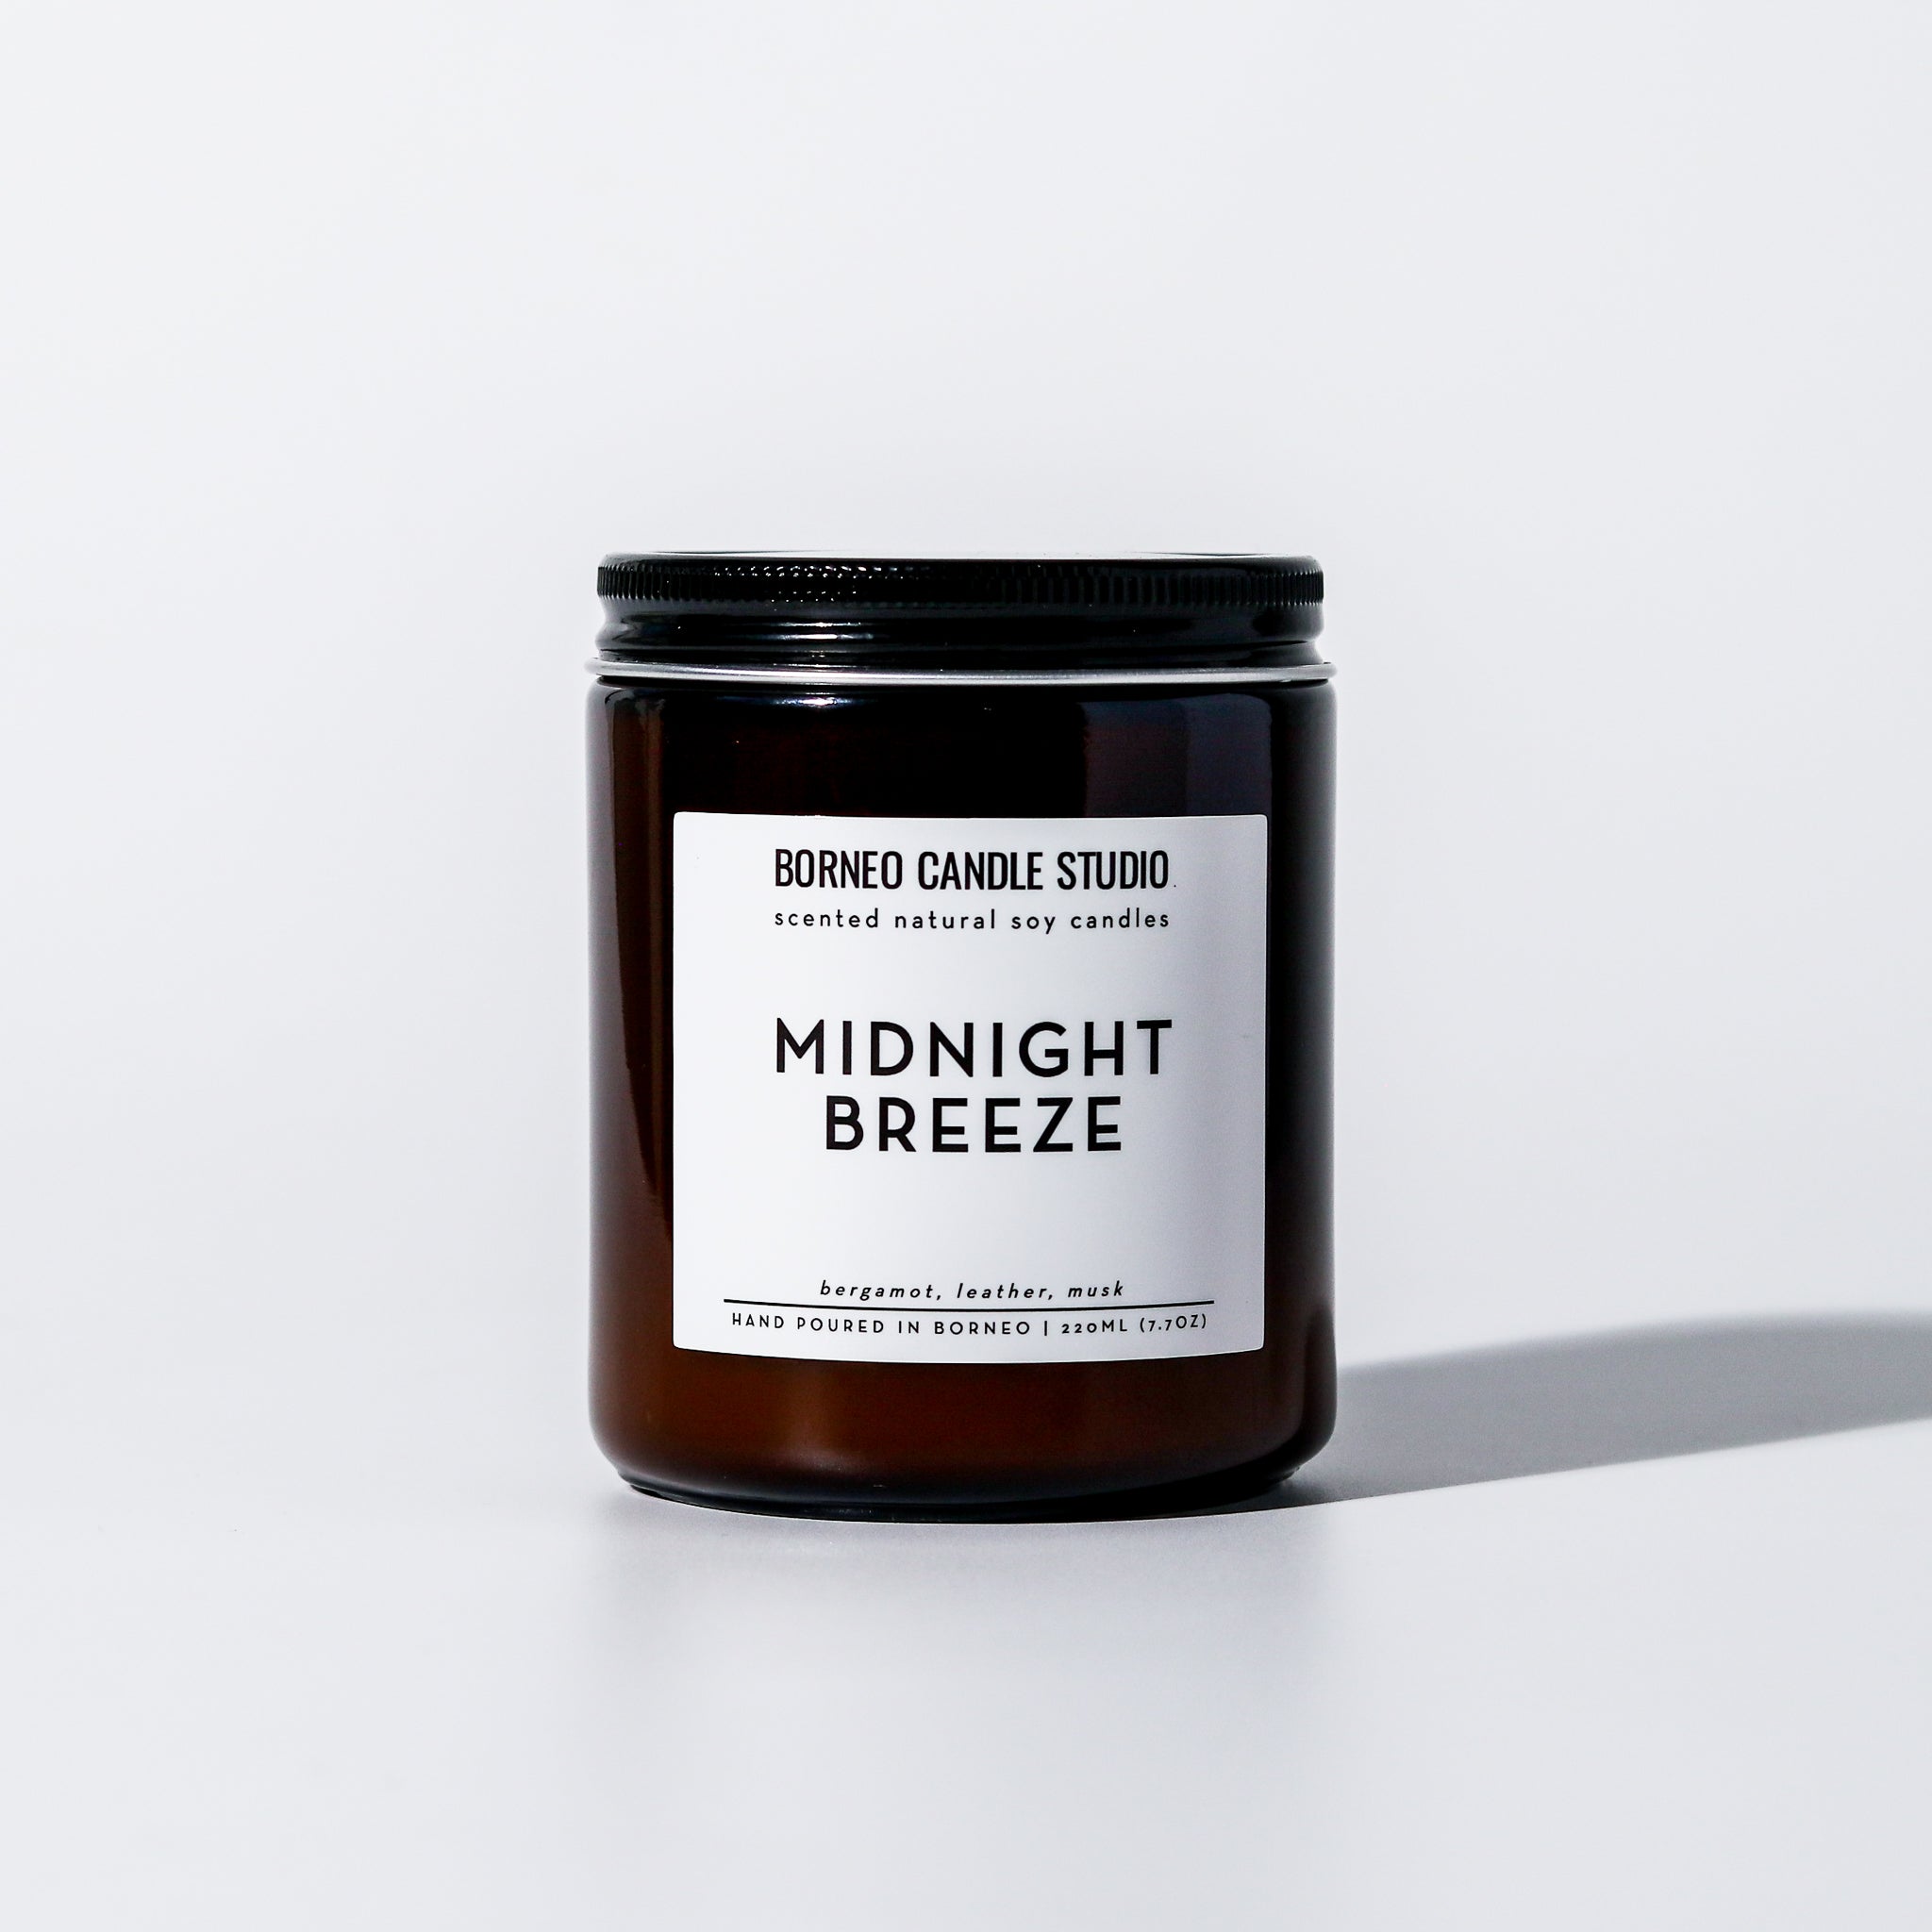 Midnight Breeze Scented Candle - bergamot, leather, musk masculine soy candle